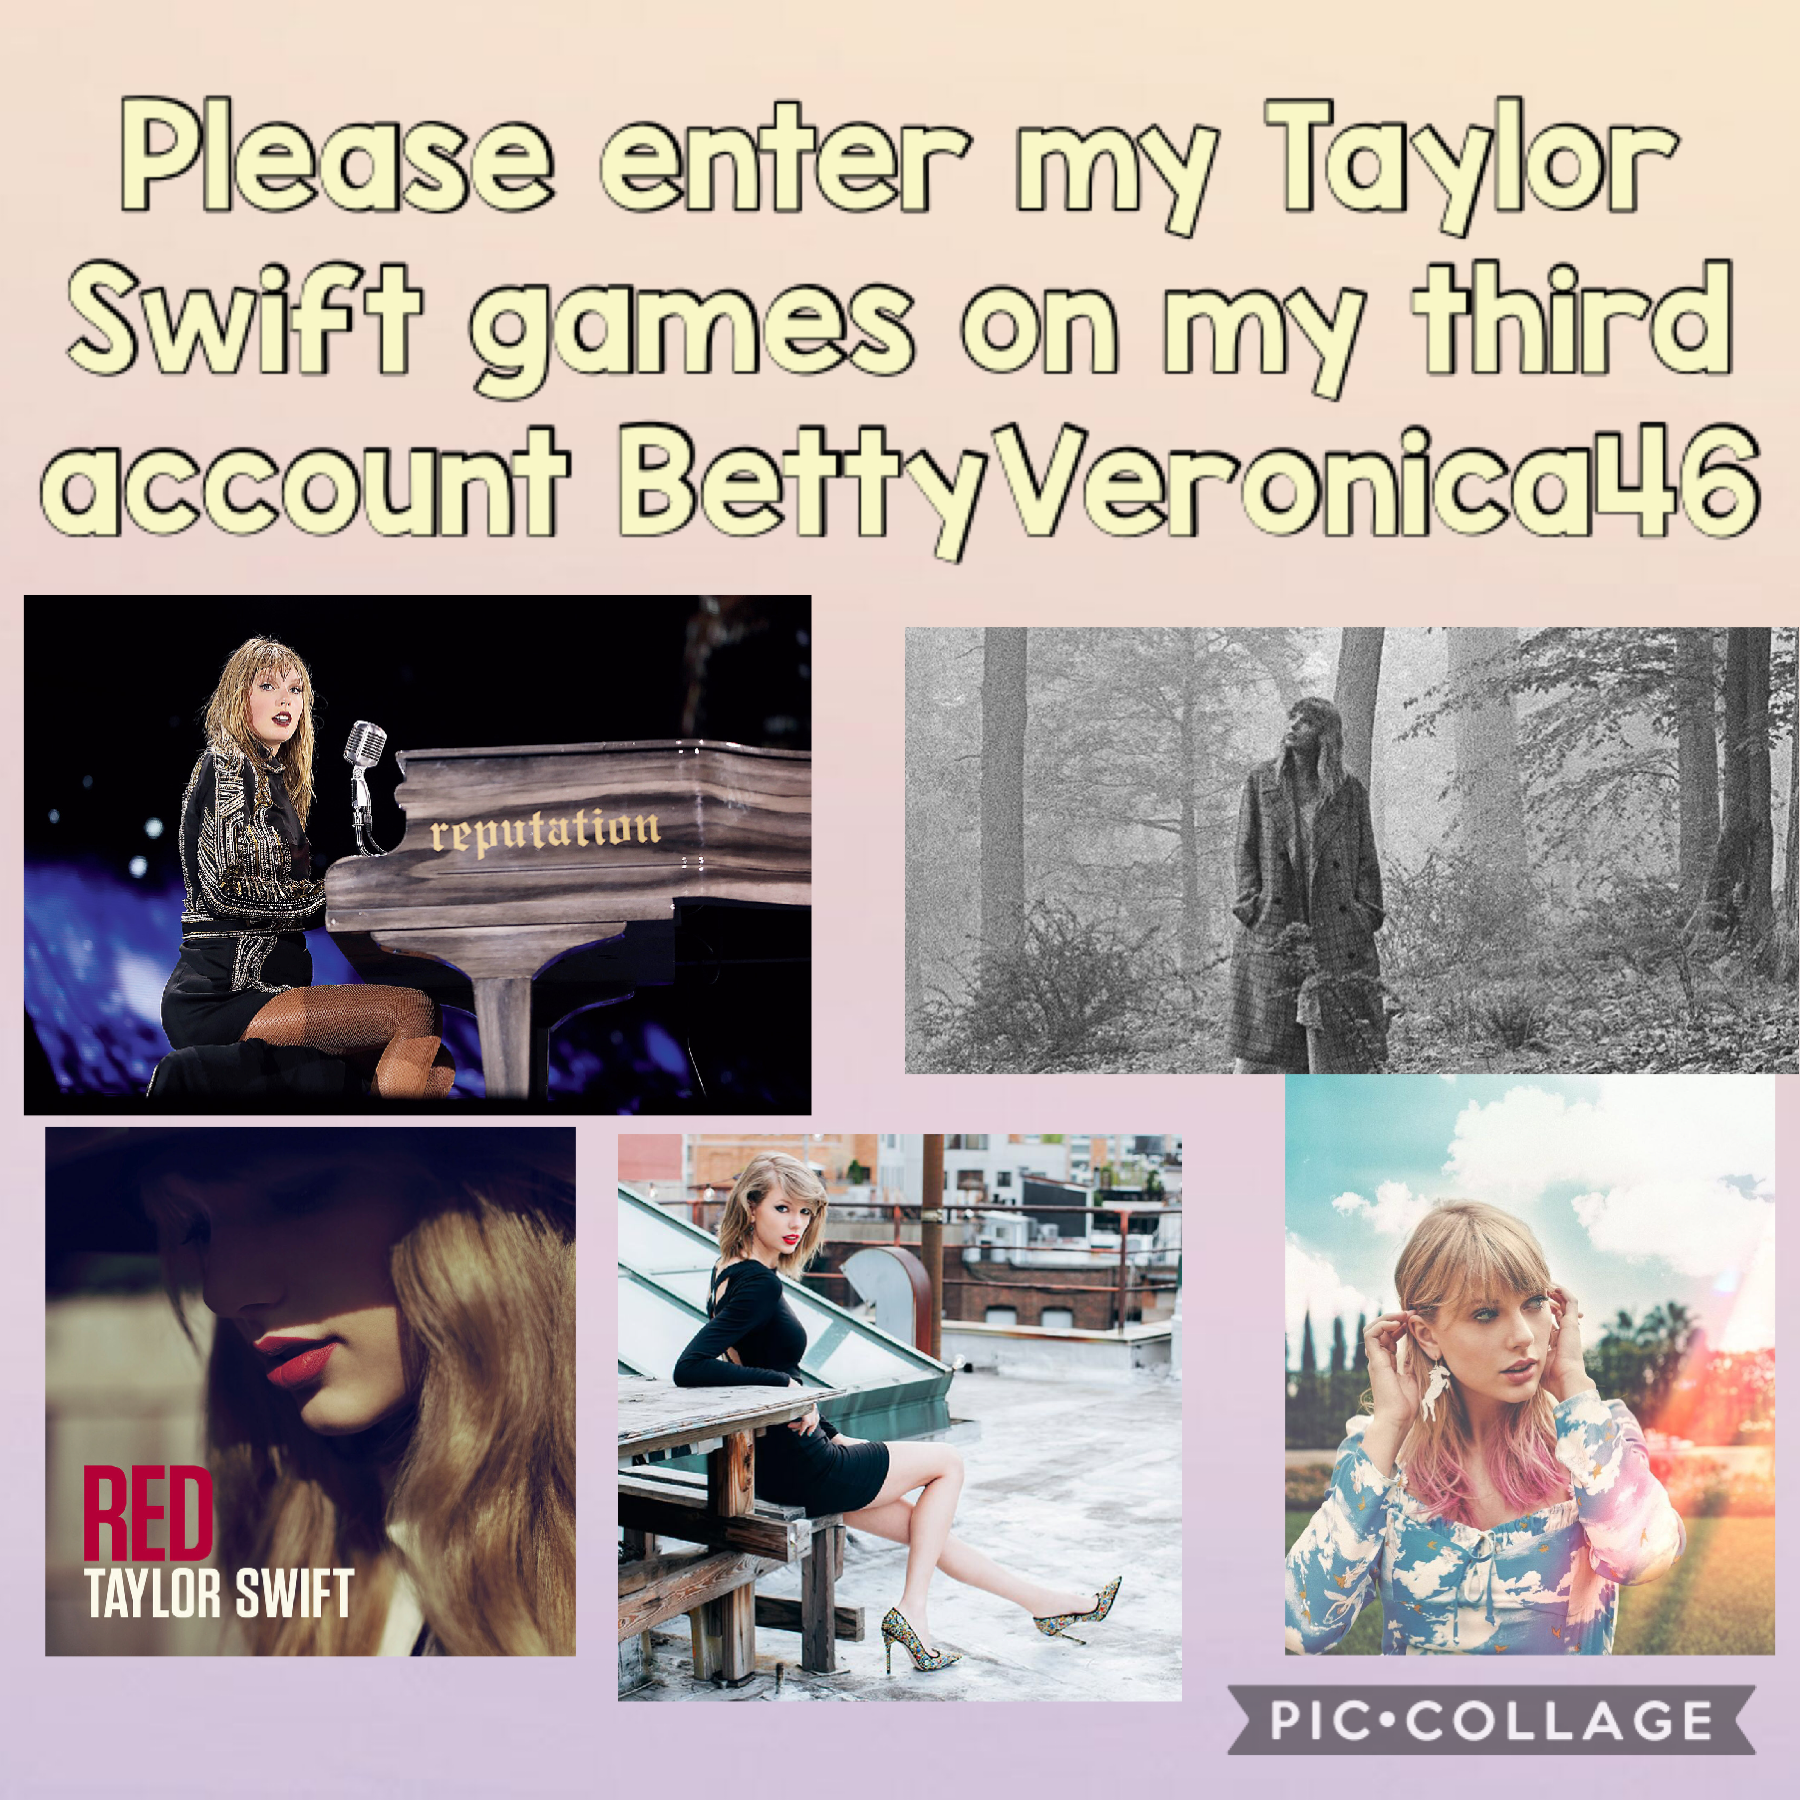 Please enter my Taylor Swift games on my third account BettyVeronica46 